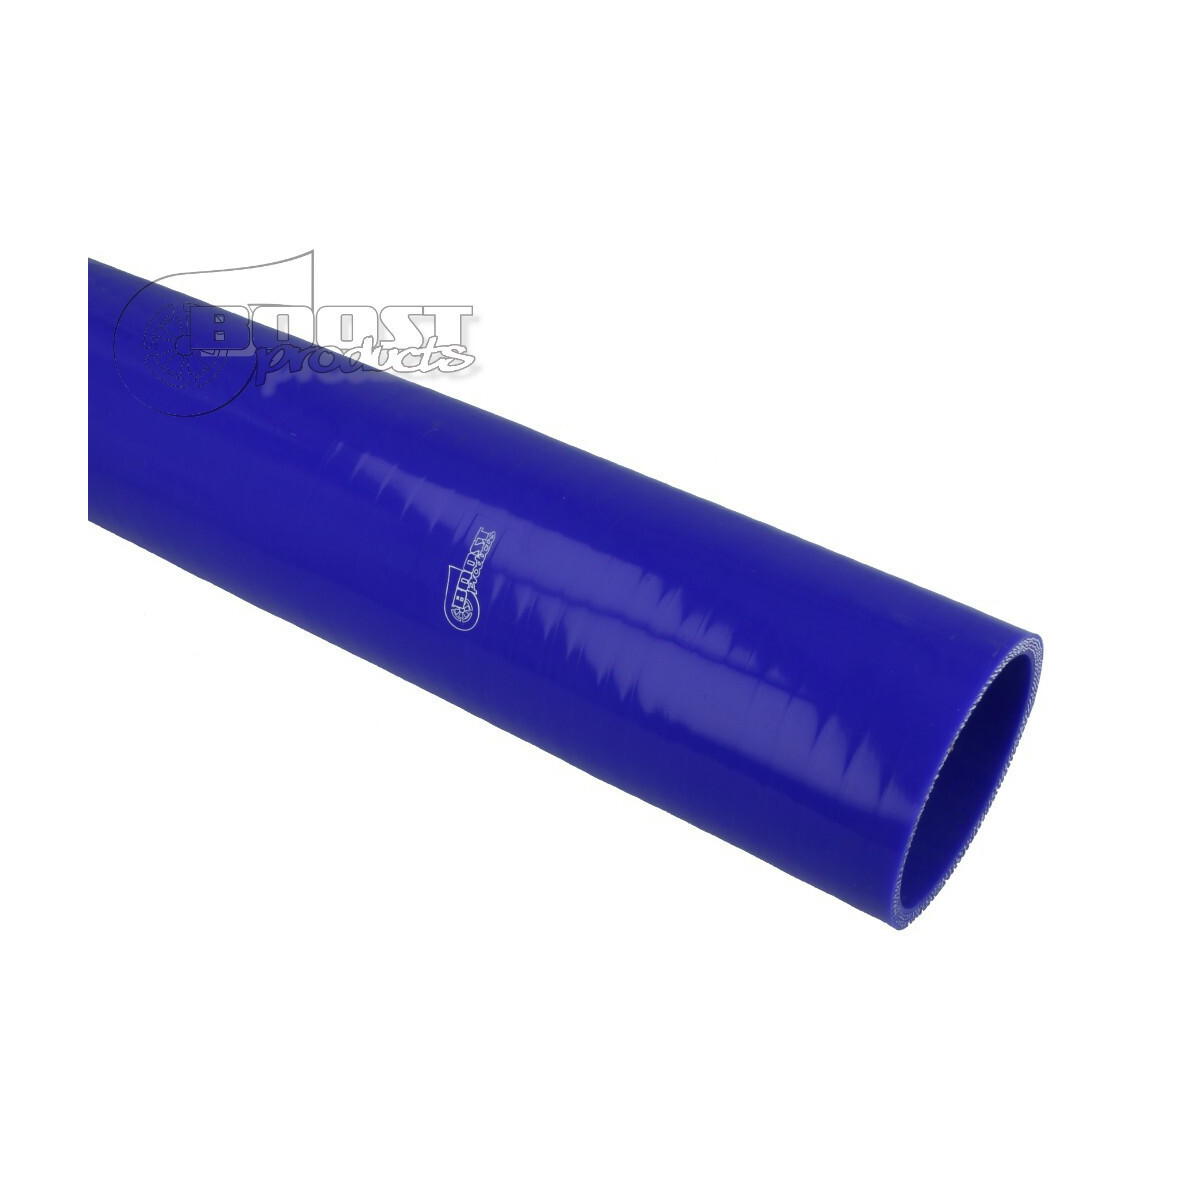 BOOST products Silicone Hose 76mm, 1m Length, blue